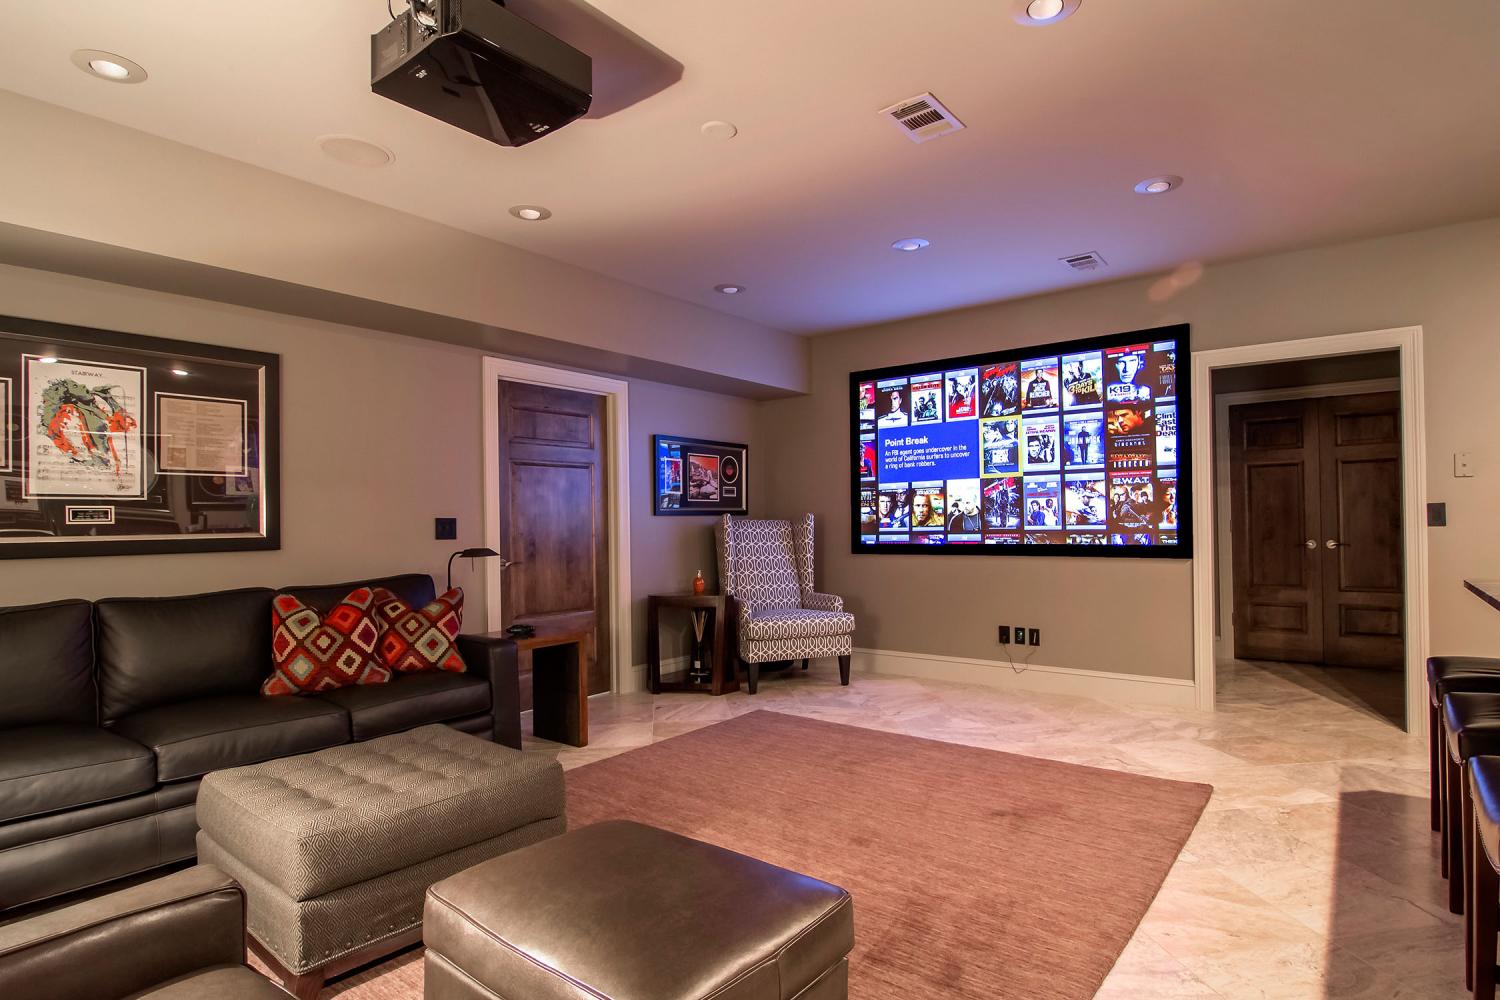 Why You Should Let Professionals Install Your Audio-Video System